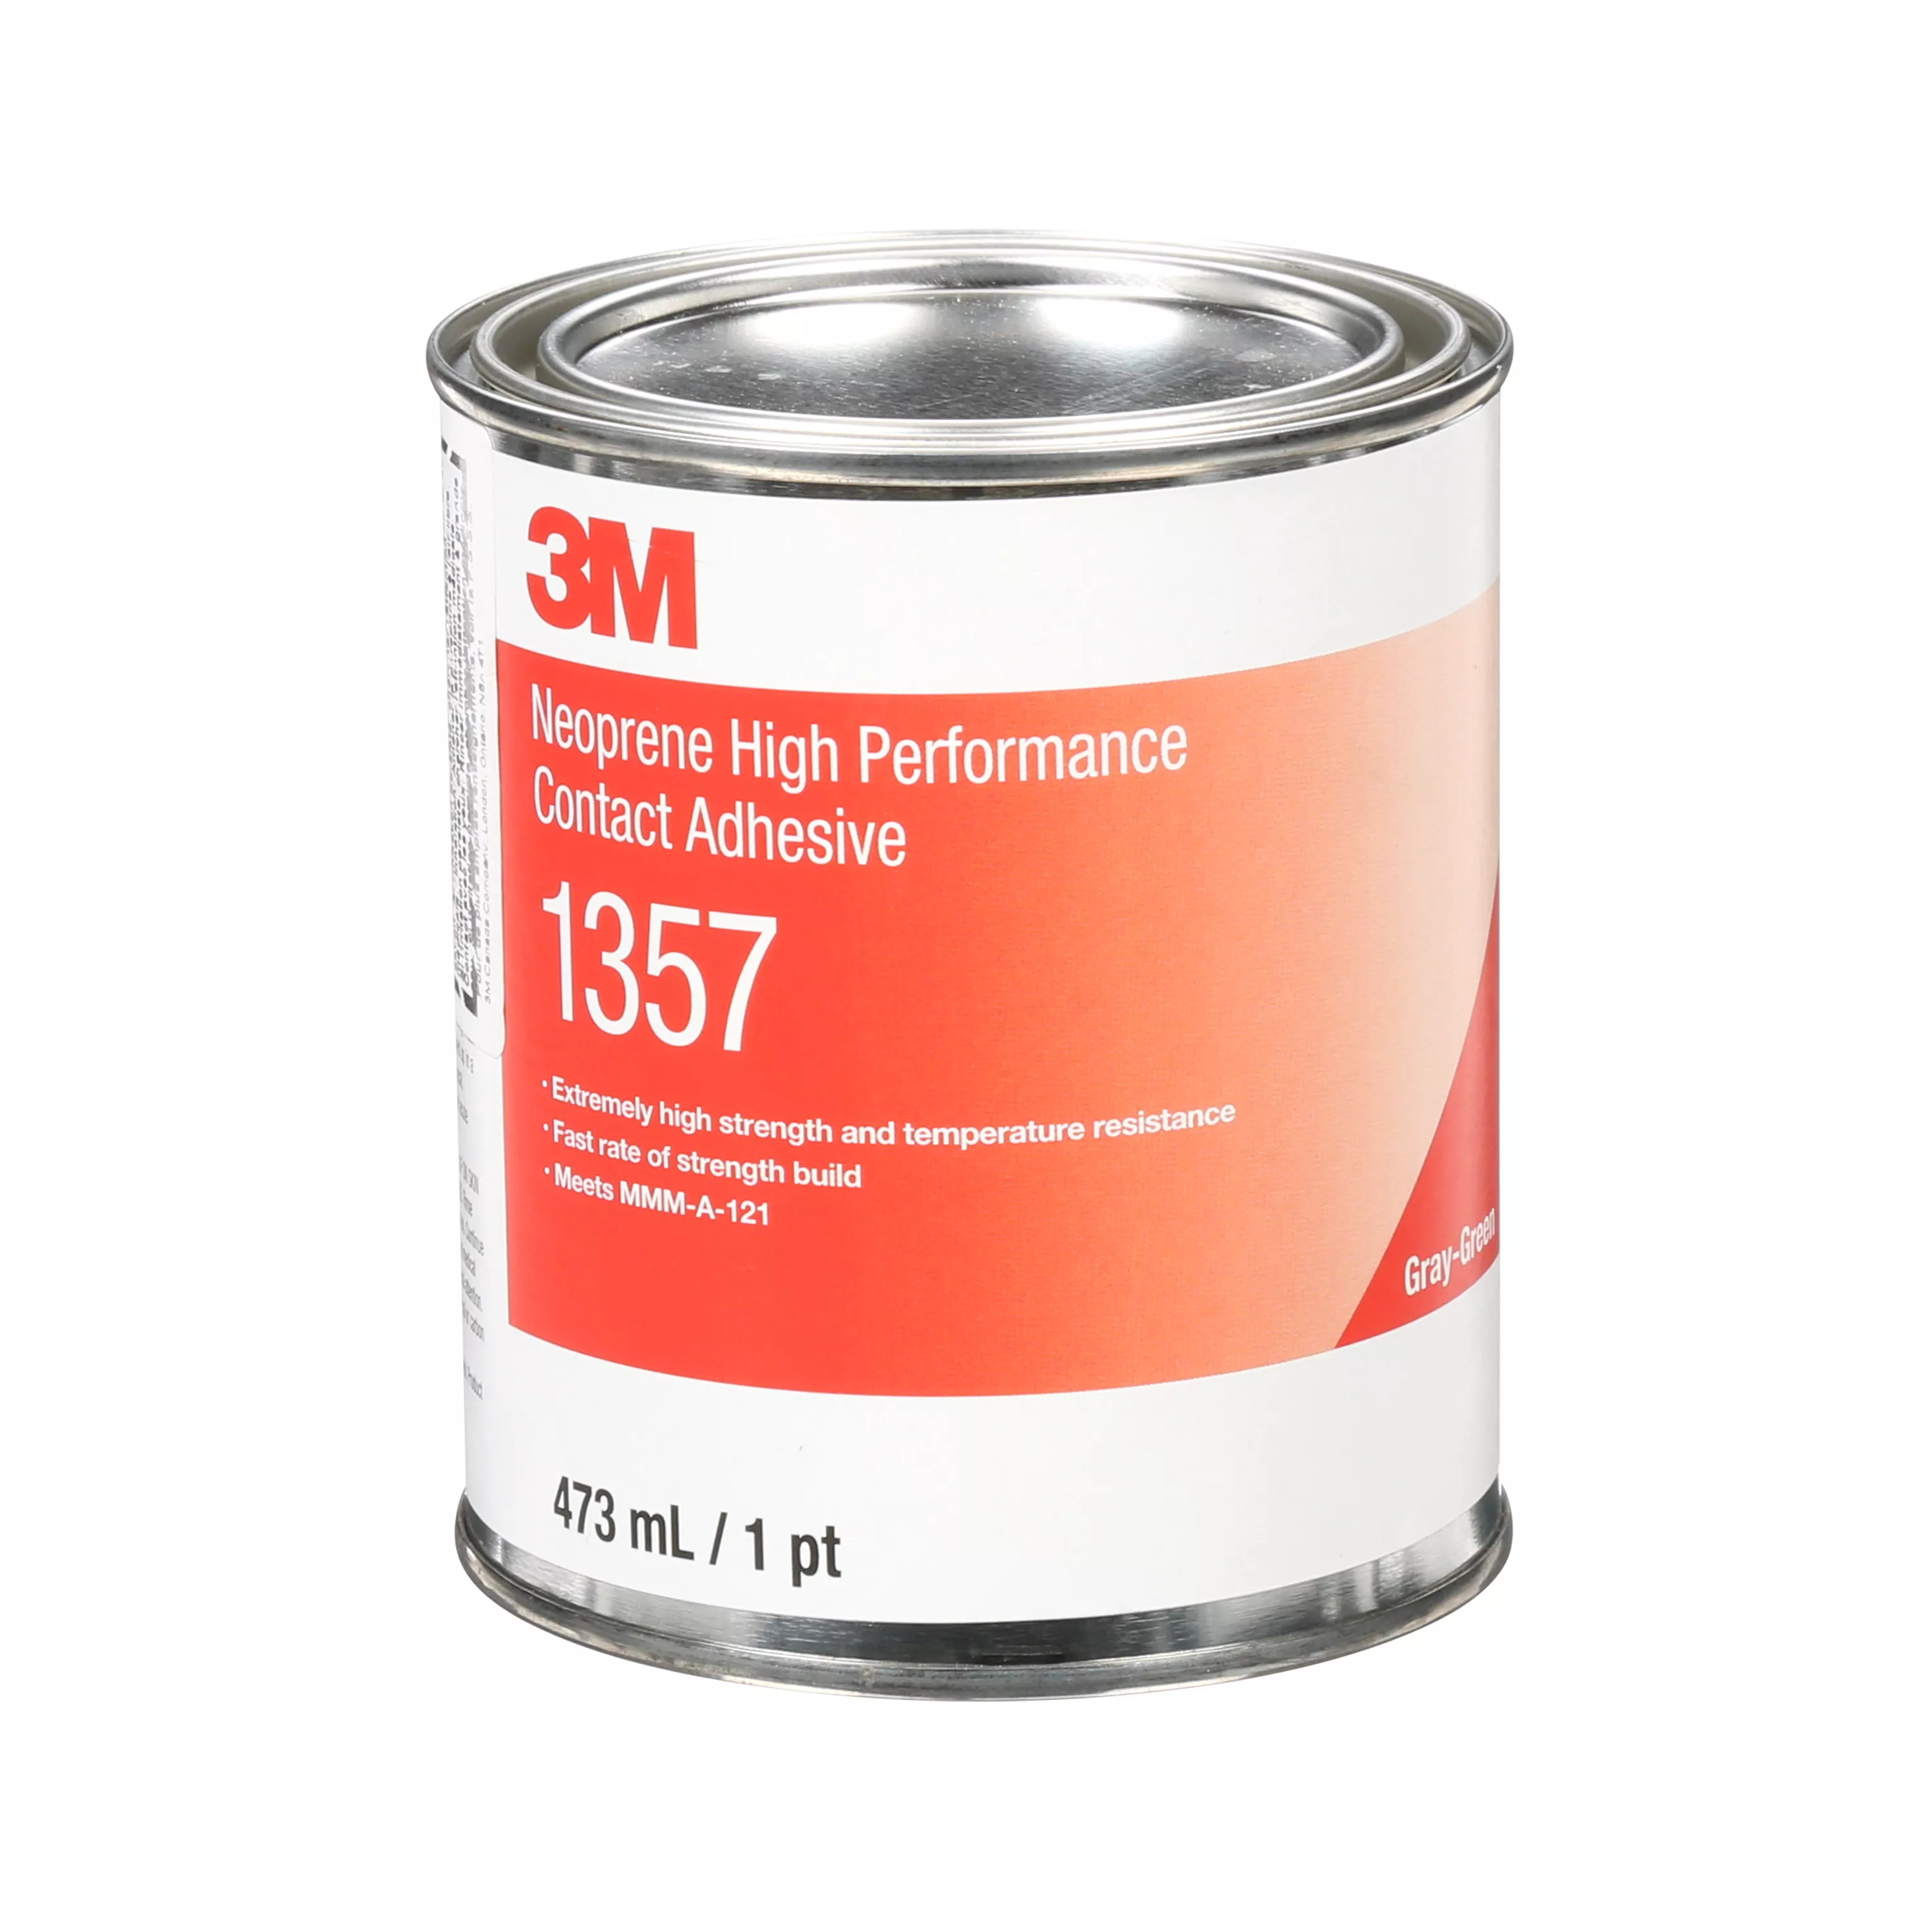 3M™ Neoprene High Performance Contact Adhesive 1357, Gray-Green, 1 Pin,
12 Can/Case